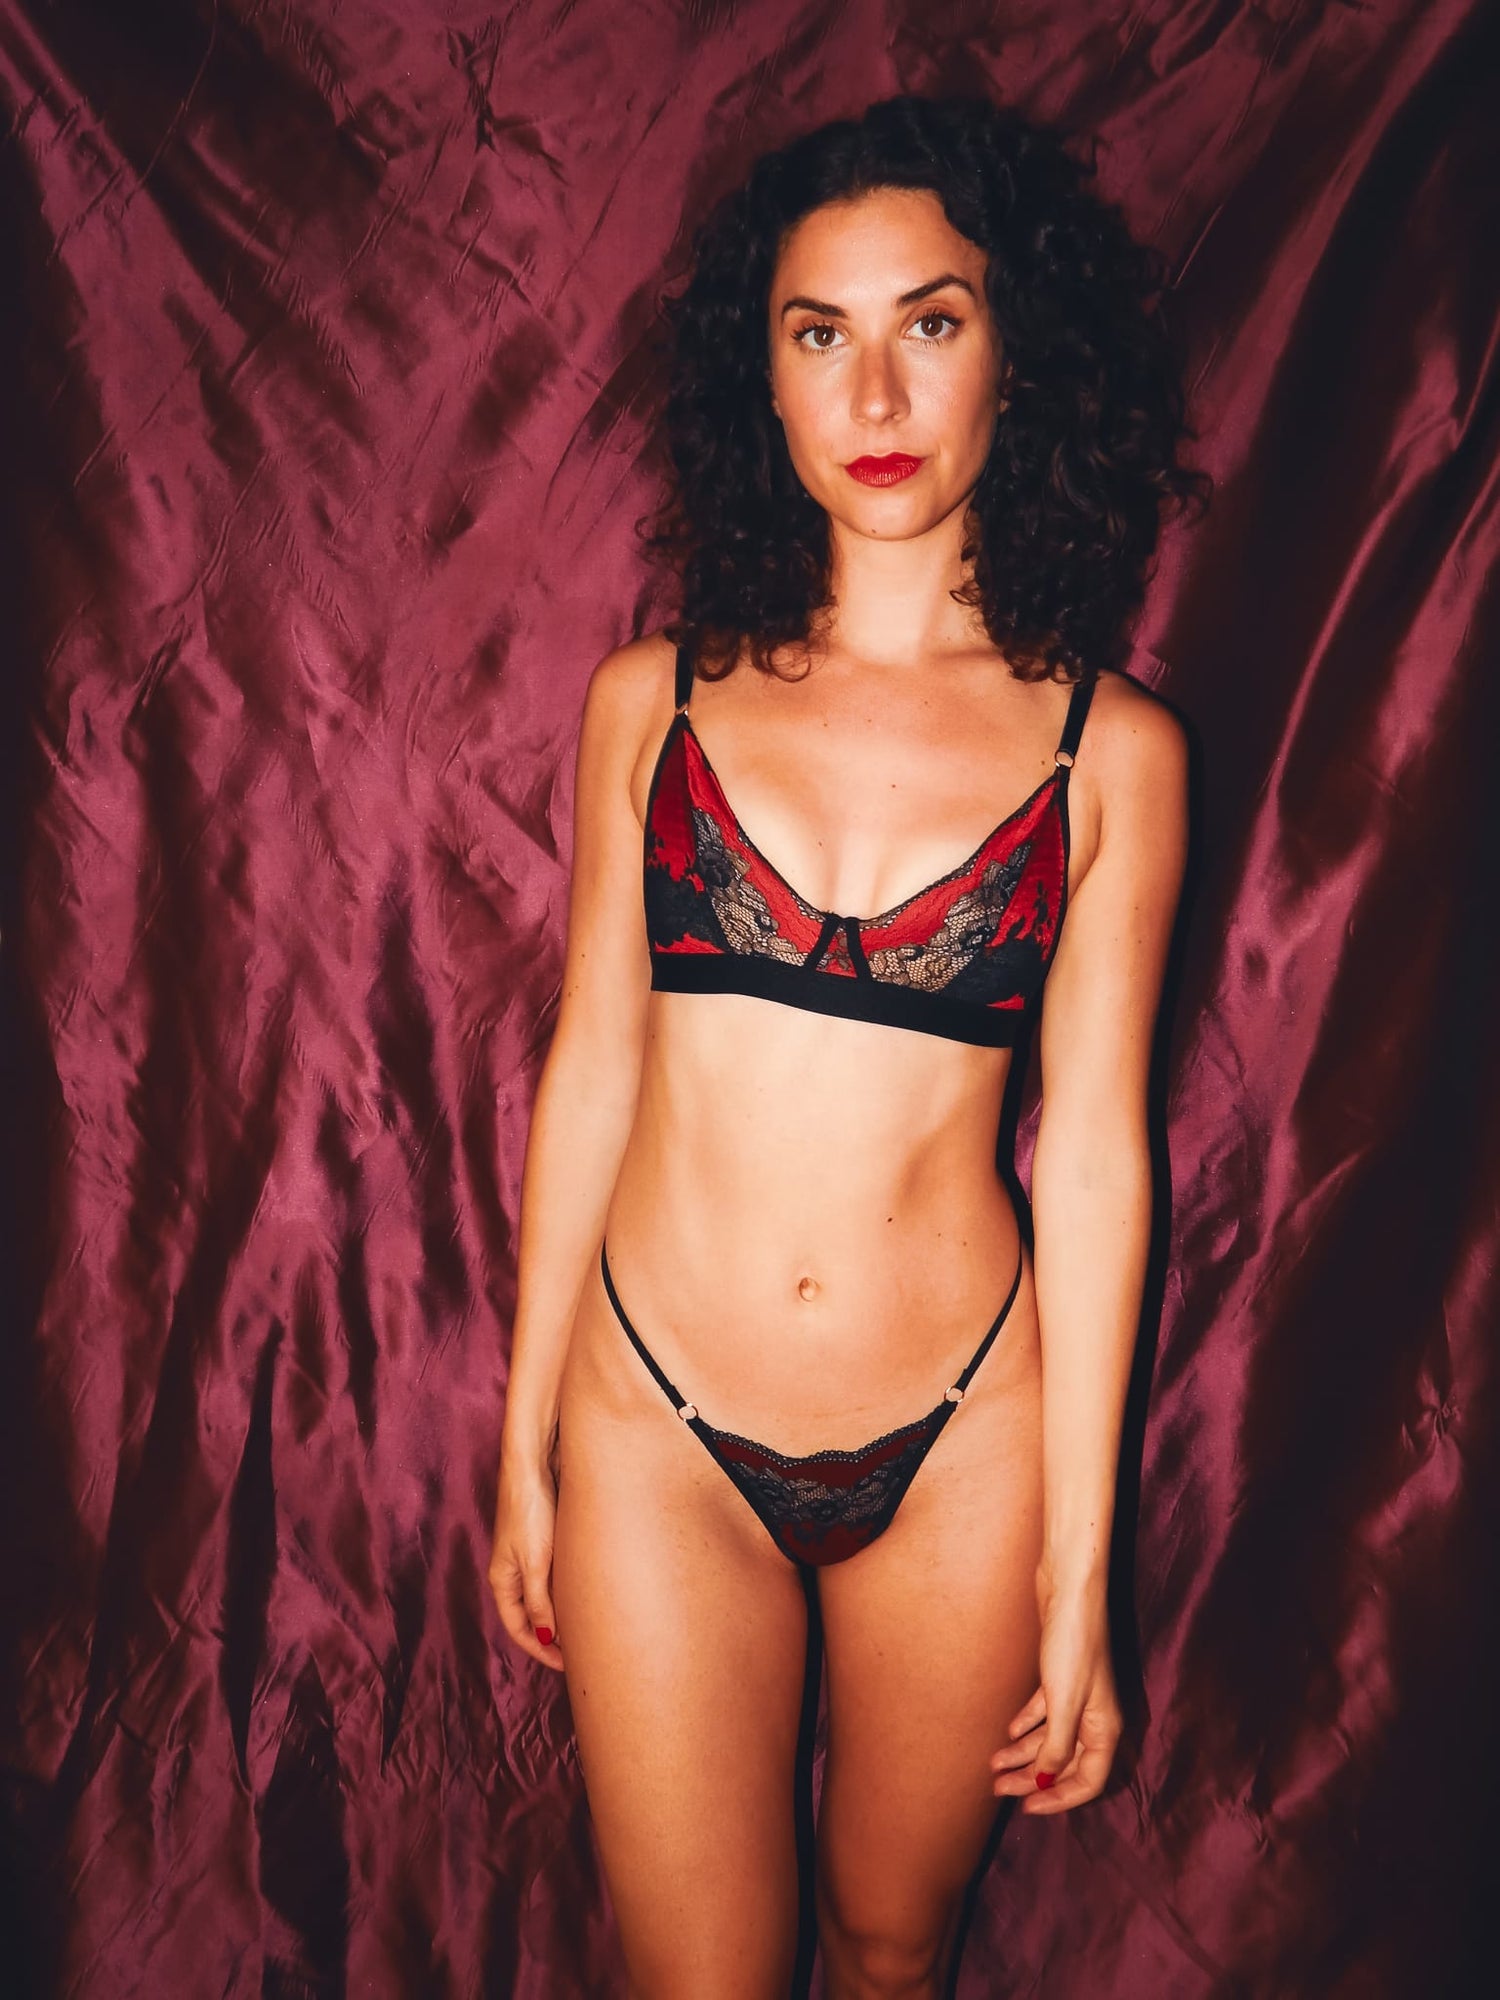 woman posing against red backdrop in black and red lace bralette